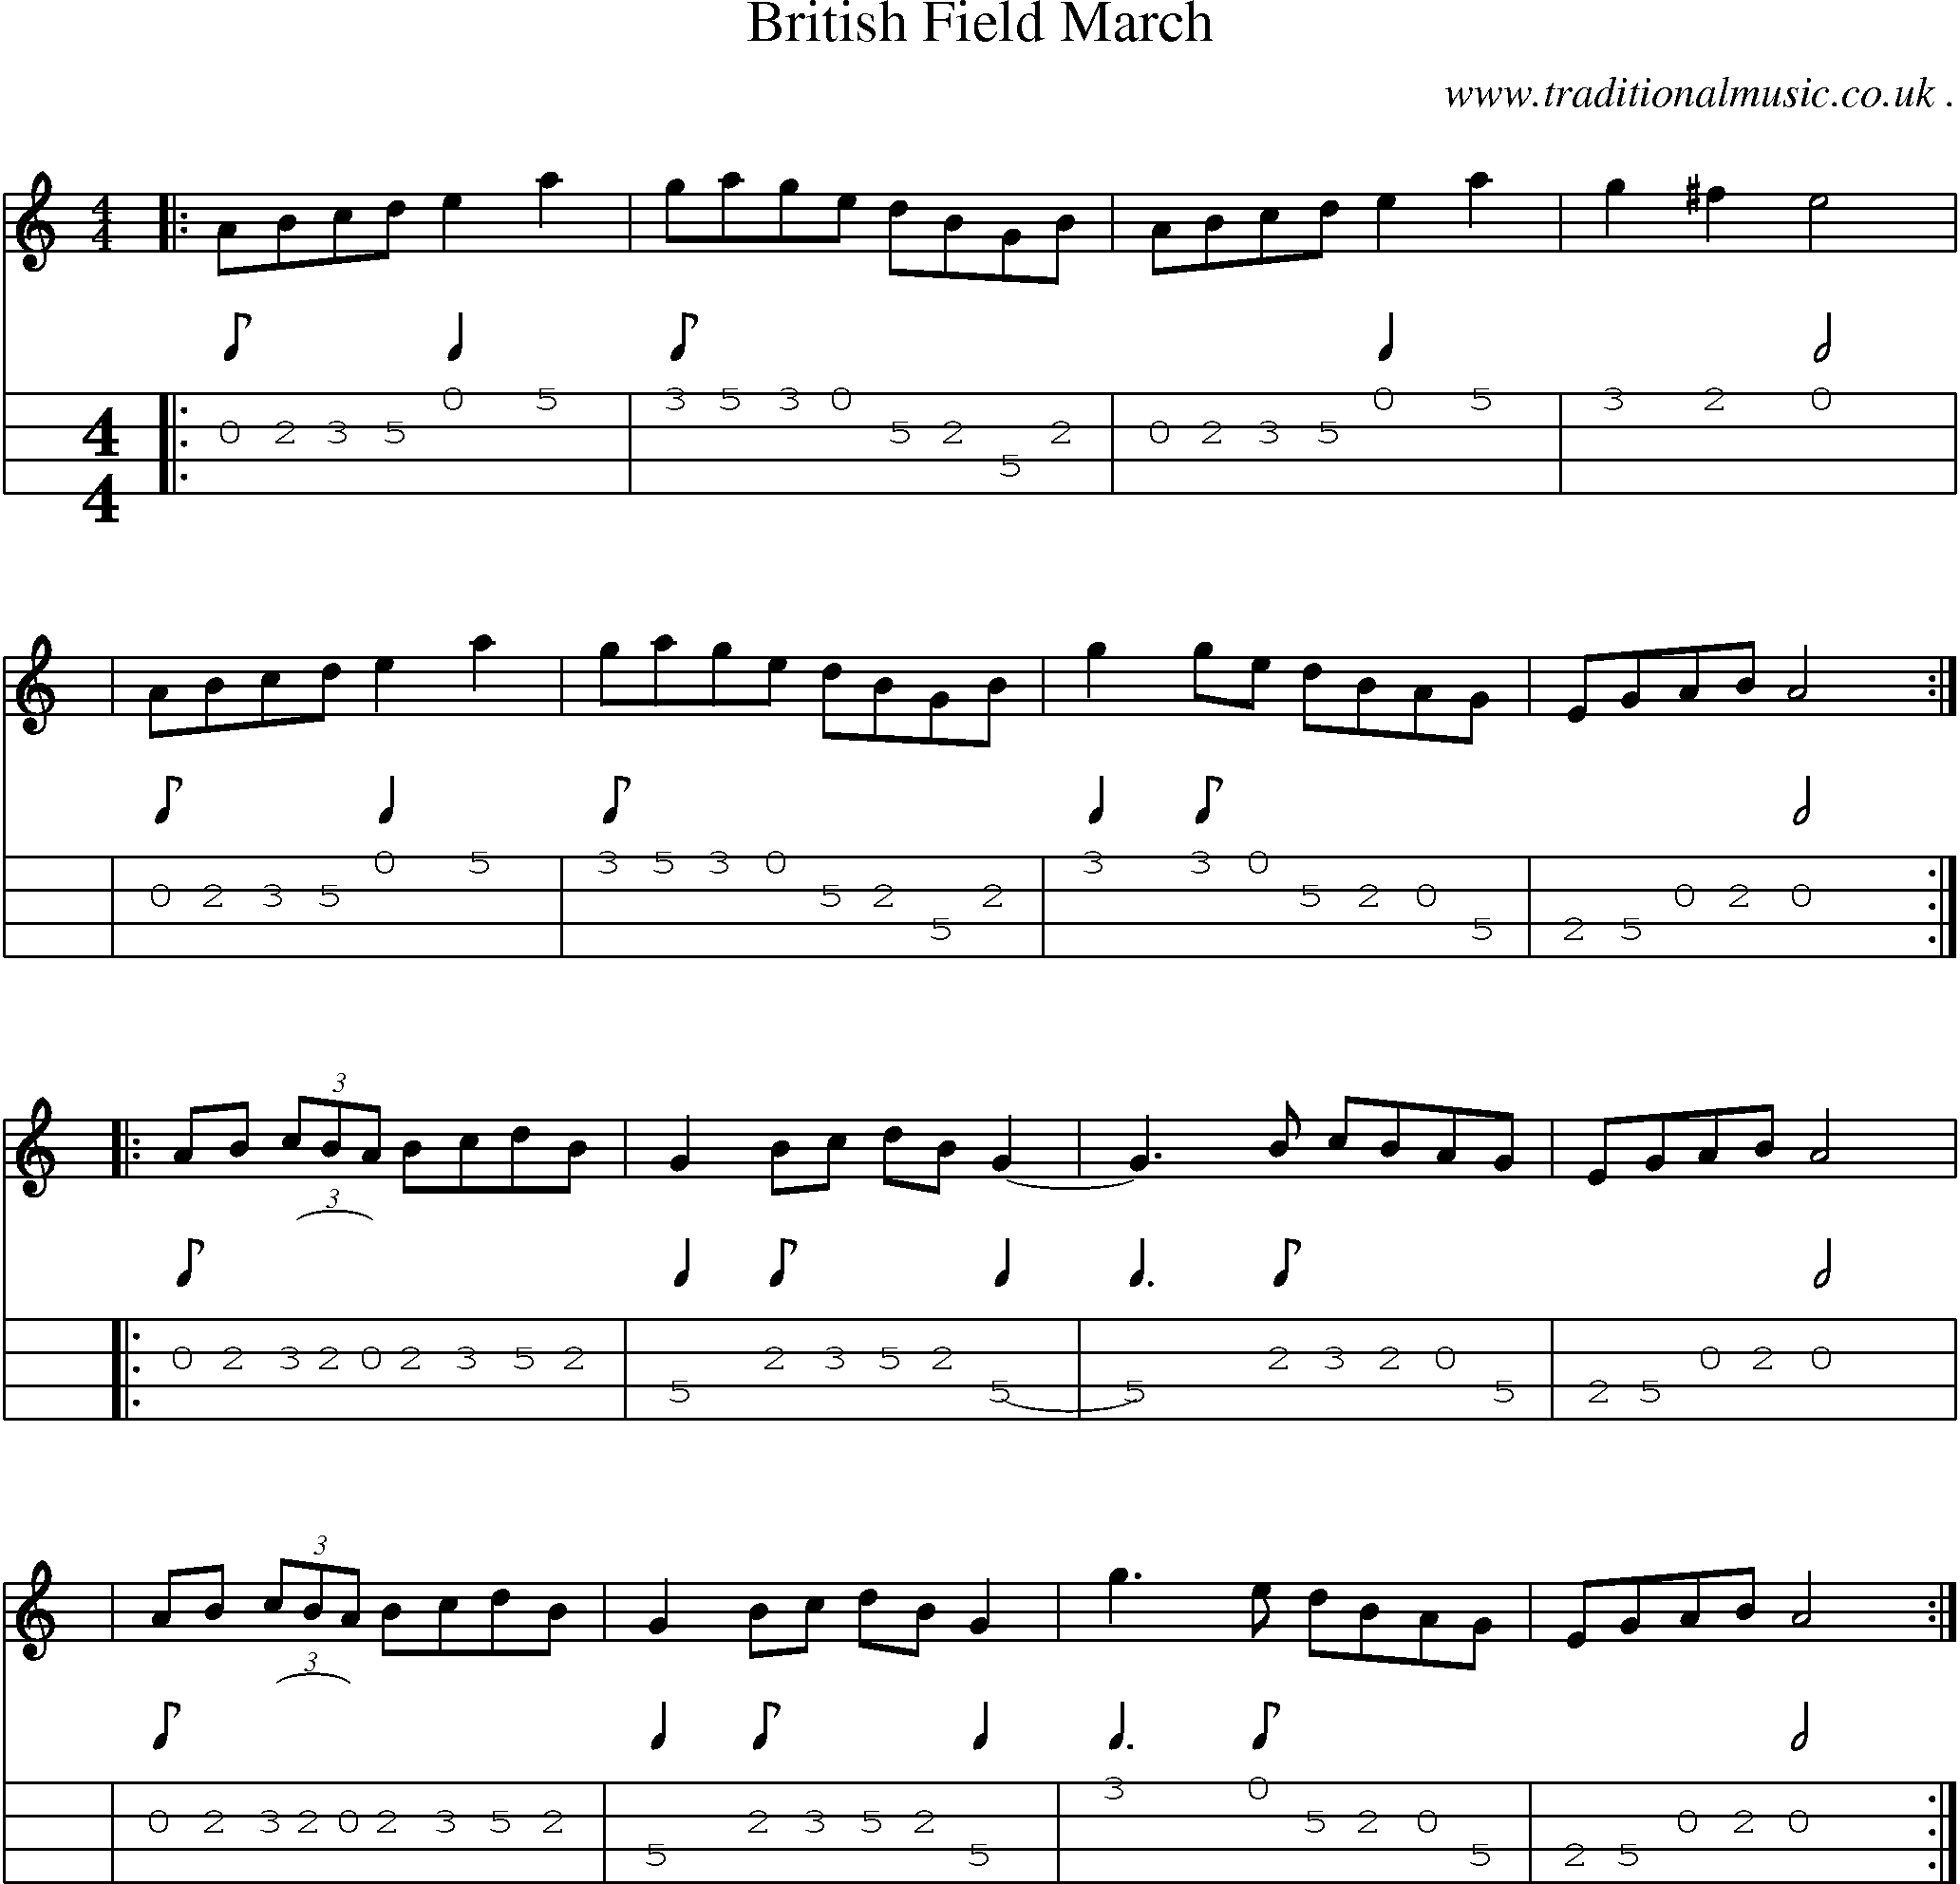 Sheet-music  score, Chords and Mandolin Tabs for British Field March